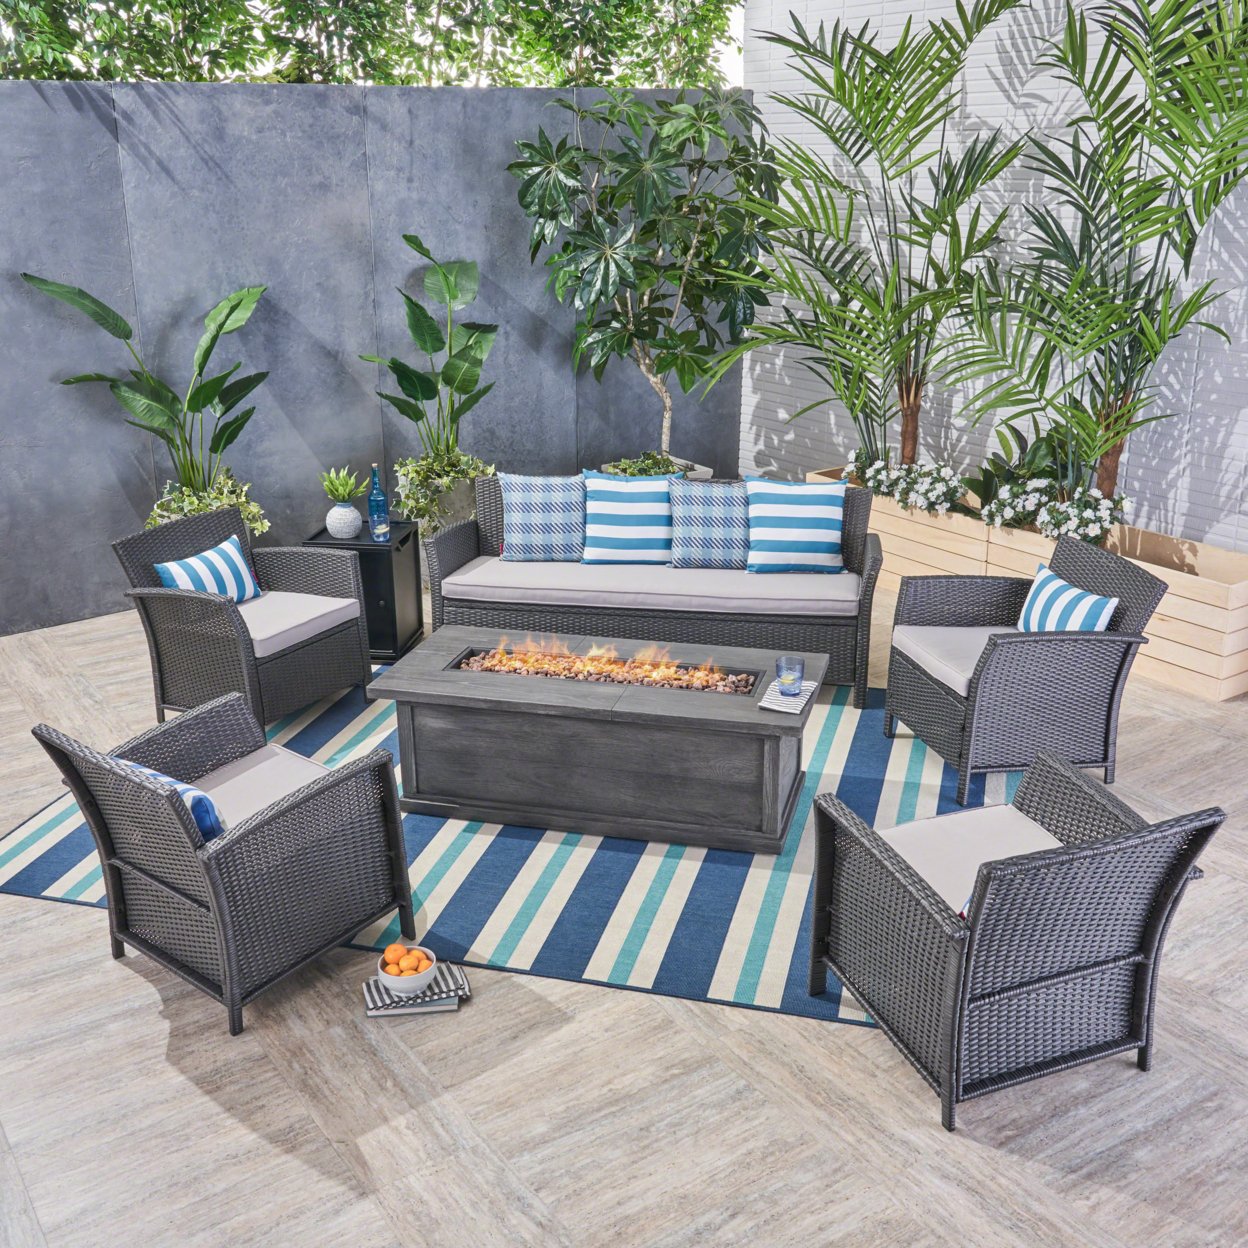 Mason Outdoor 7 Seater Wicker Chat Set With Fire Pit - Gray + Silver